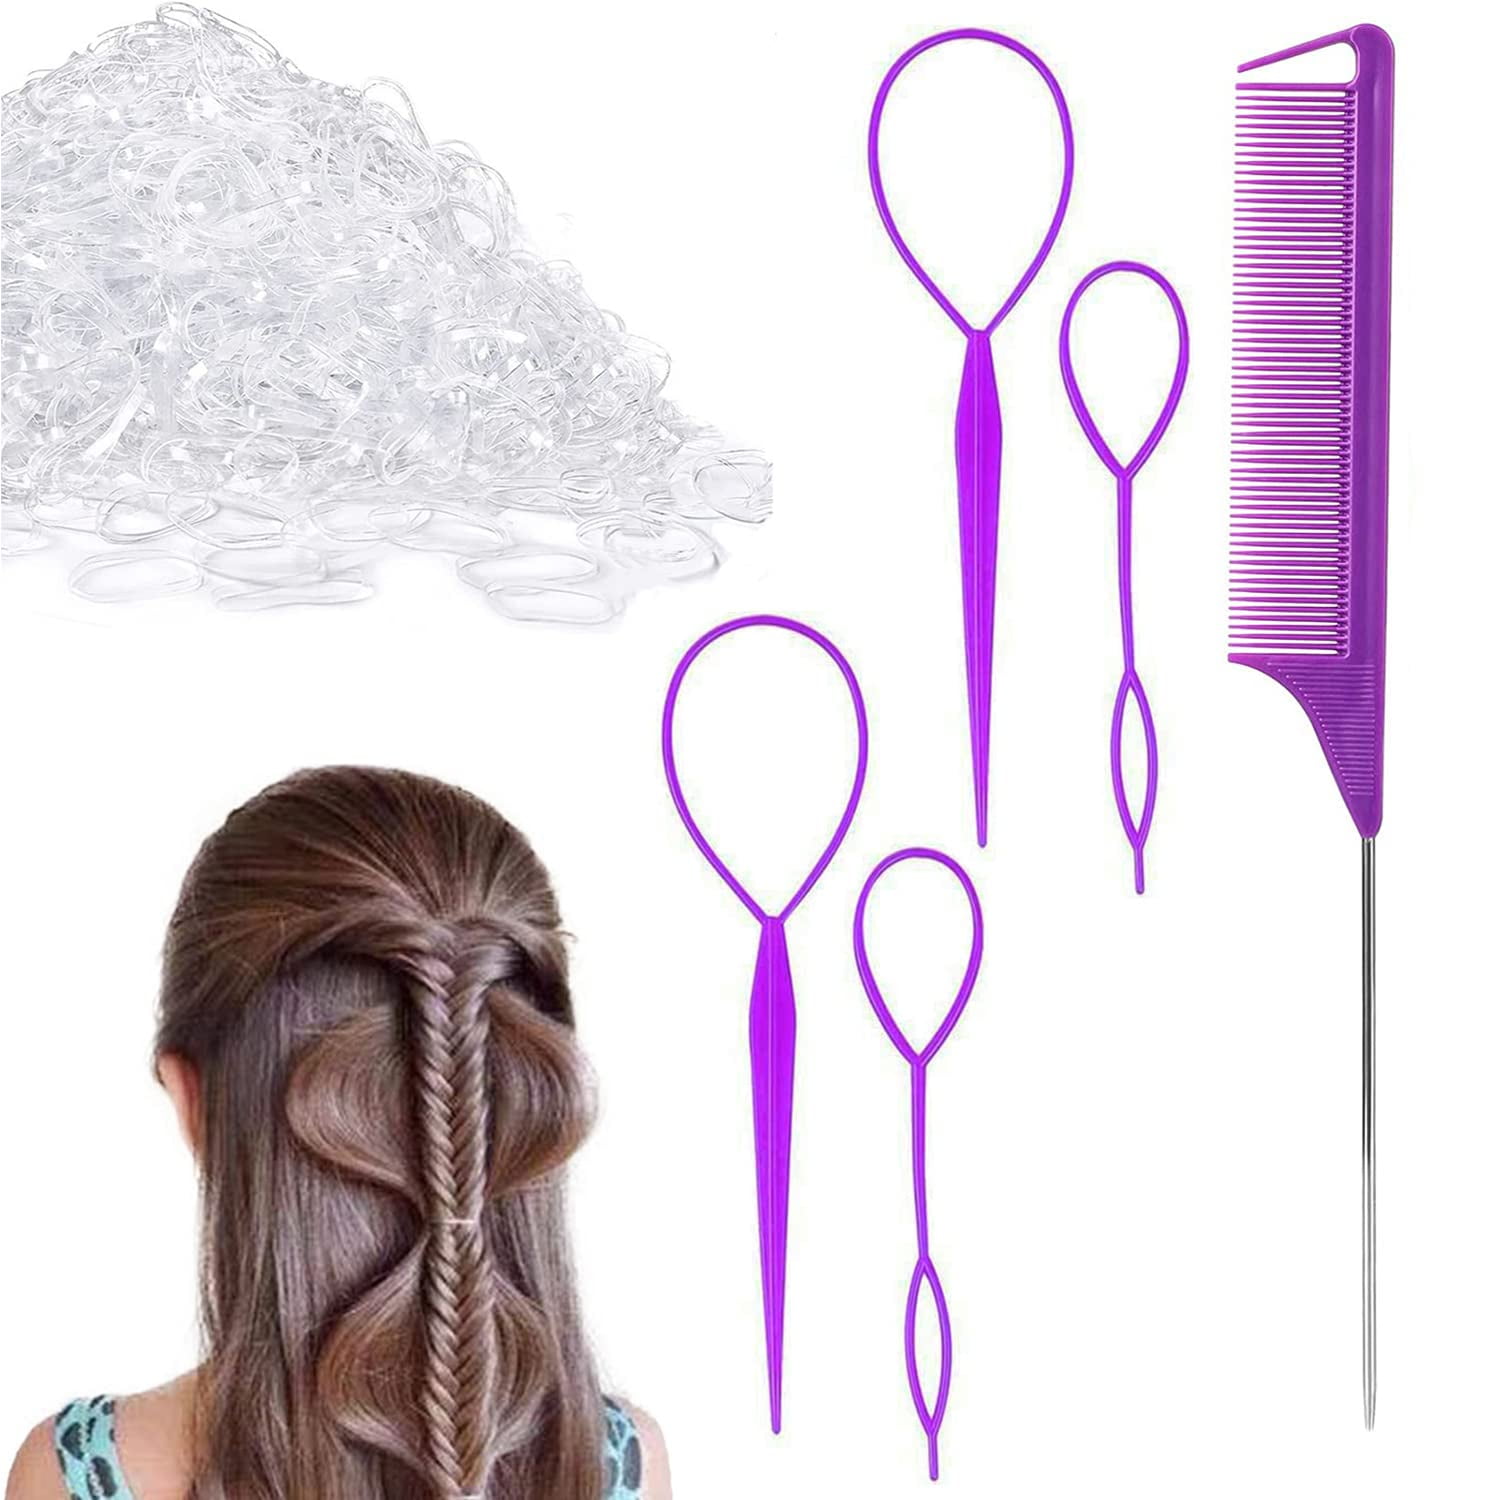 79style 1000pcs Colored Rubber Bnads Cutter Small Hair Elastics Baby Grils Hair Ties No Damage Hair Bnads Remover Braiding Tools Topsy Styling Hair